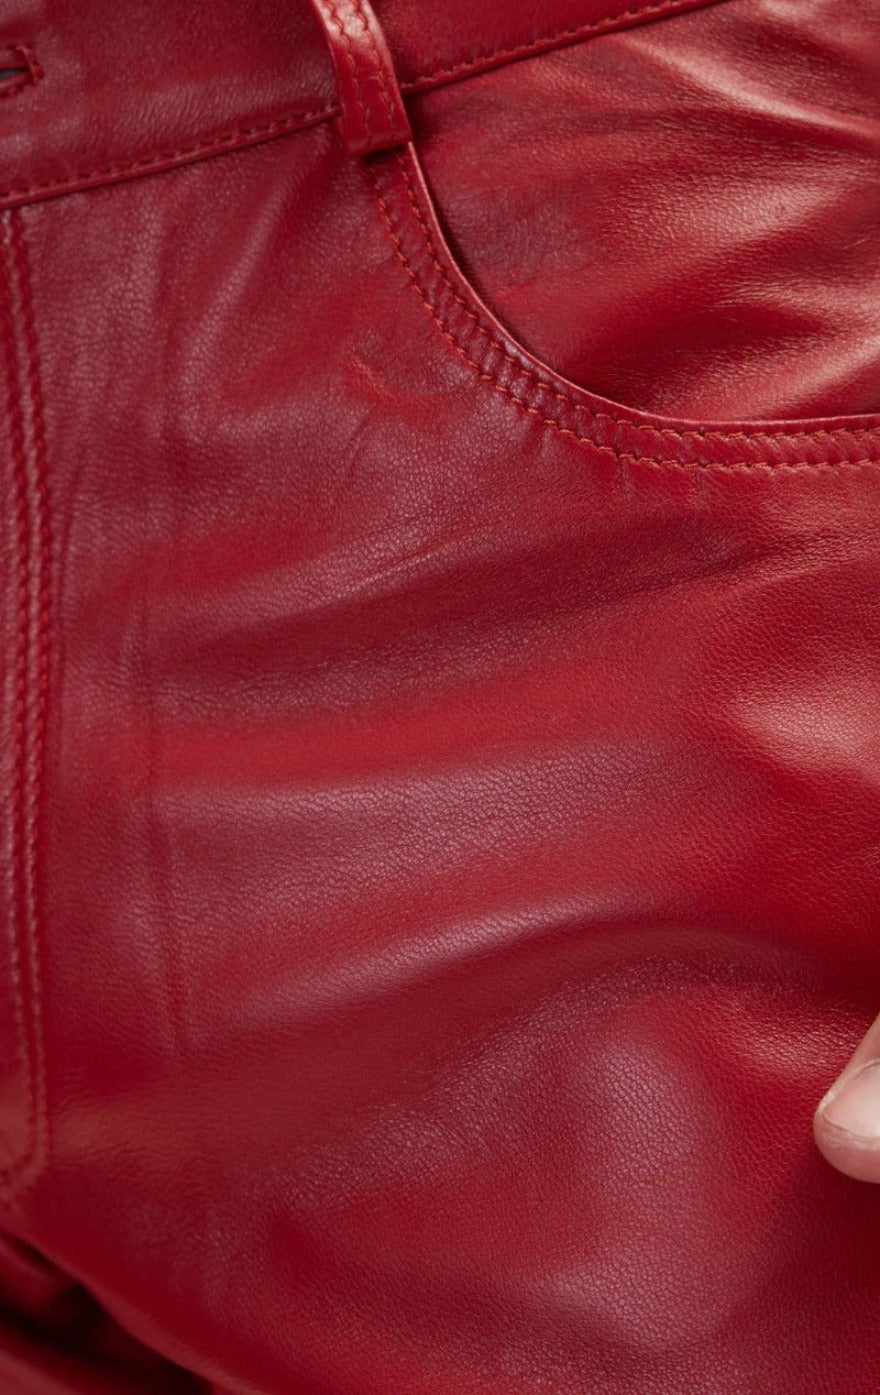 Close up view of the pocket of our Mens Red Leather jeans.